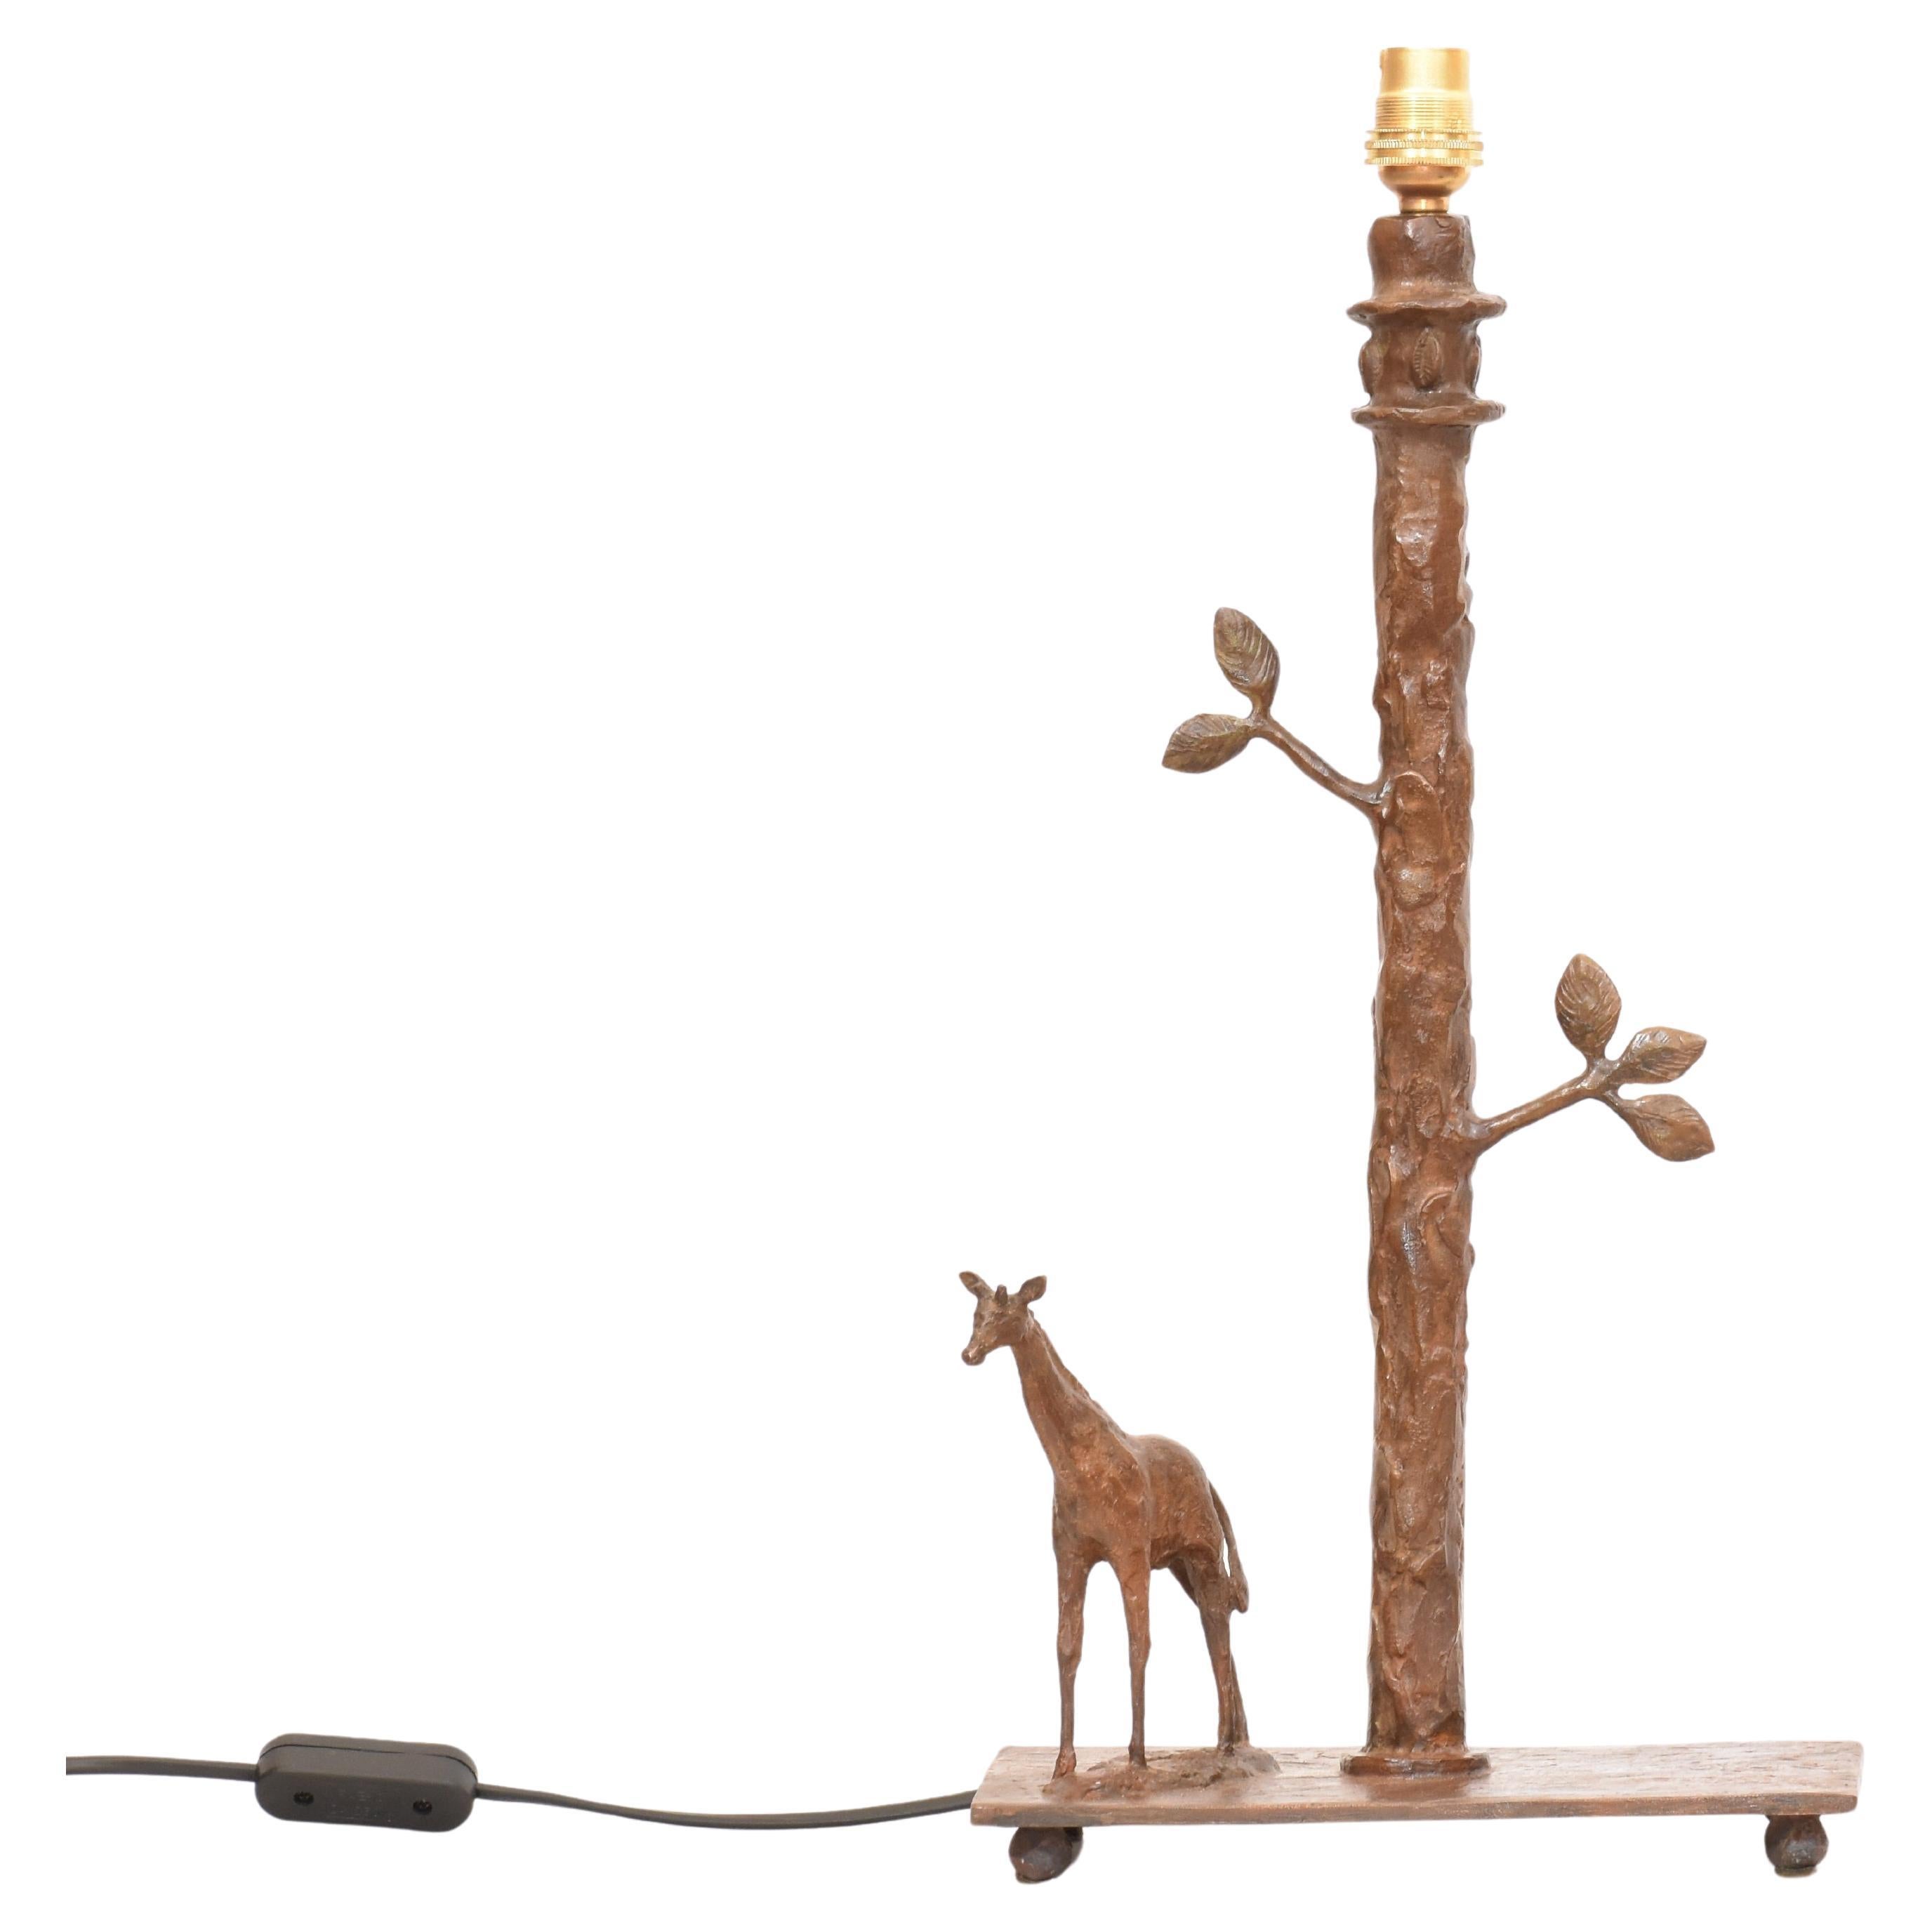 Handcrafted Sculptural Giraffe Table Lamp in cast bronze using the lost wax method. Handmade - sculpted, cast and finished individually by hand making each piece one of a kind.

Height 41 cm (including brass light fitting, excluding lampshade), lamp